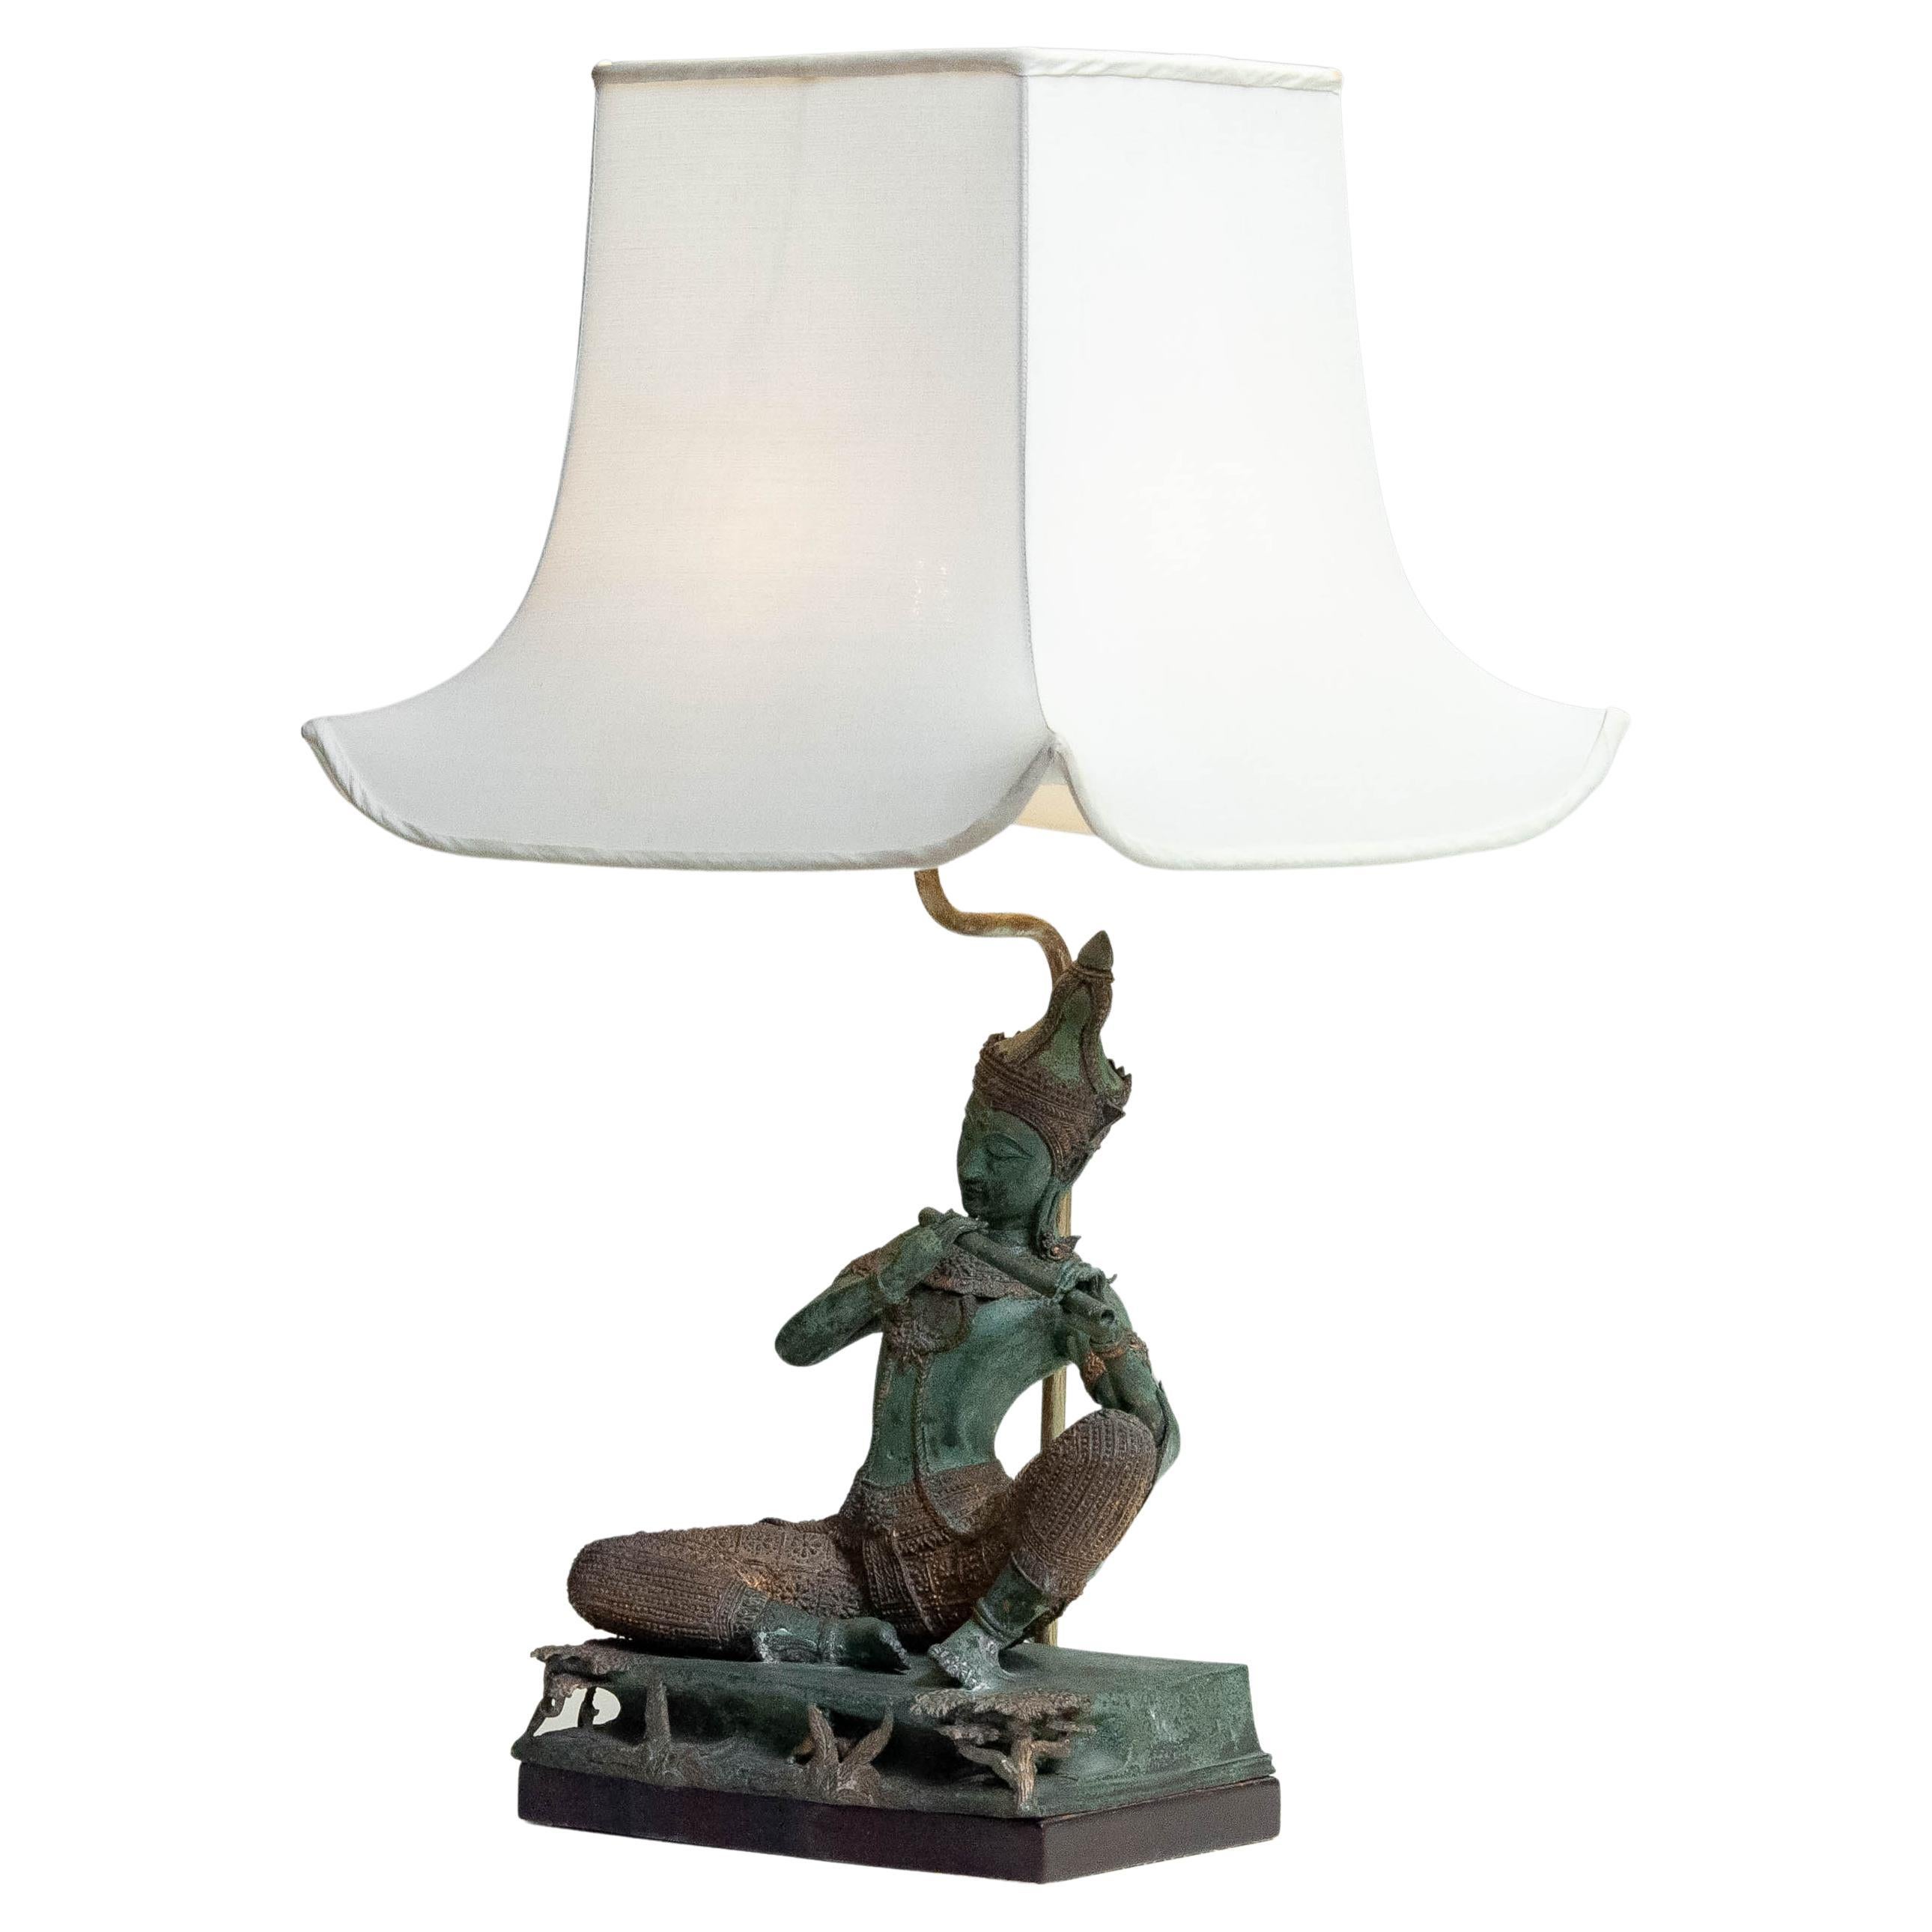 1970s Asian Vintage Table Lamp with Bronze / Gild Statue of Phra Aphai Mani For Sale